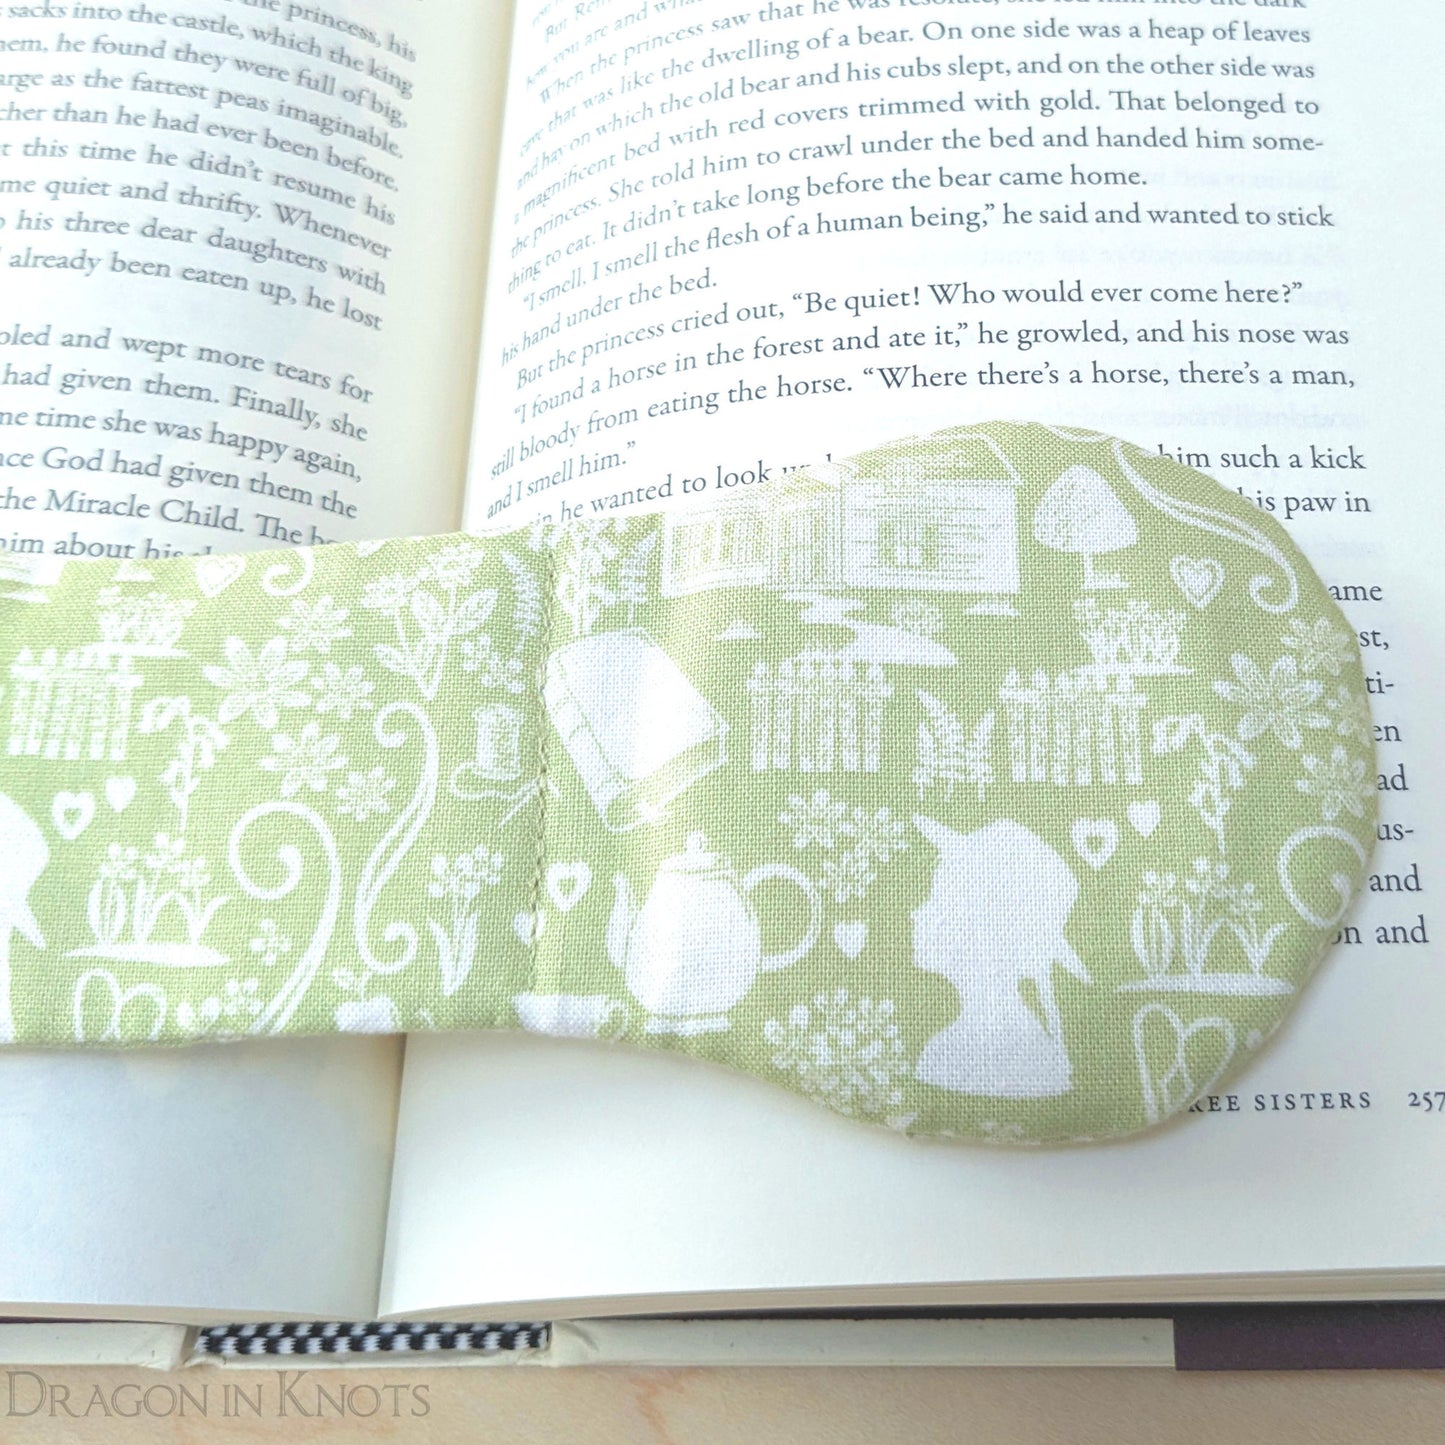 Anne Book Weight - light green fabric - Dragon in Knots